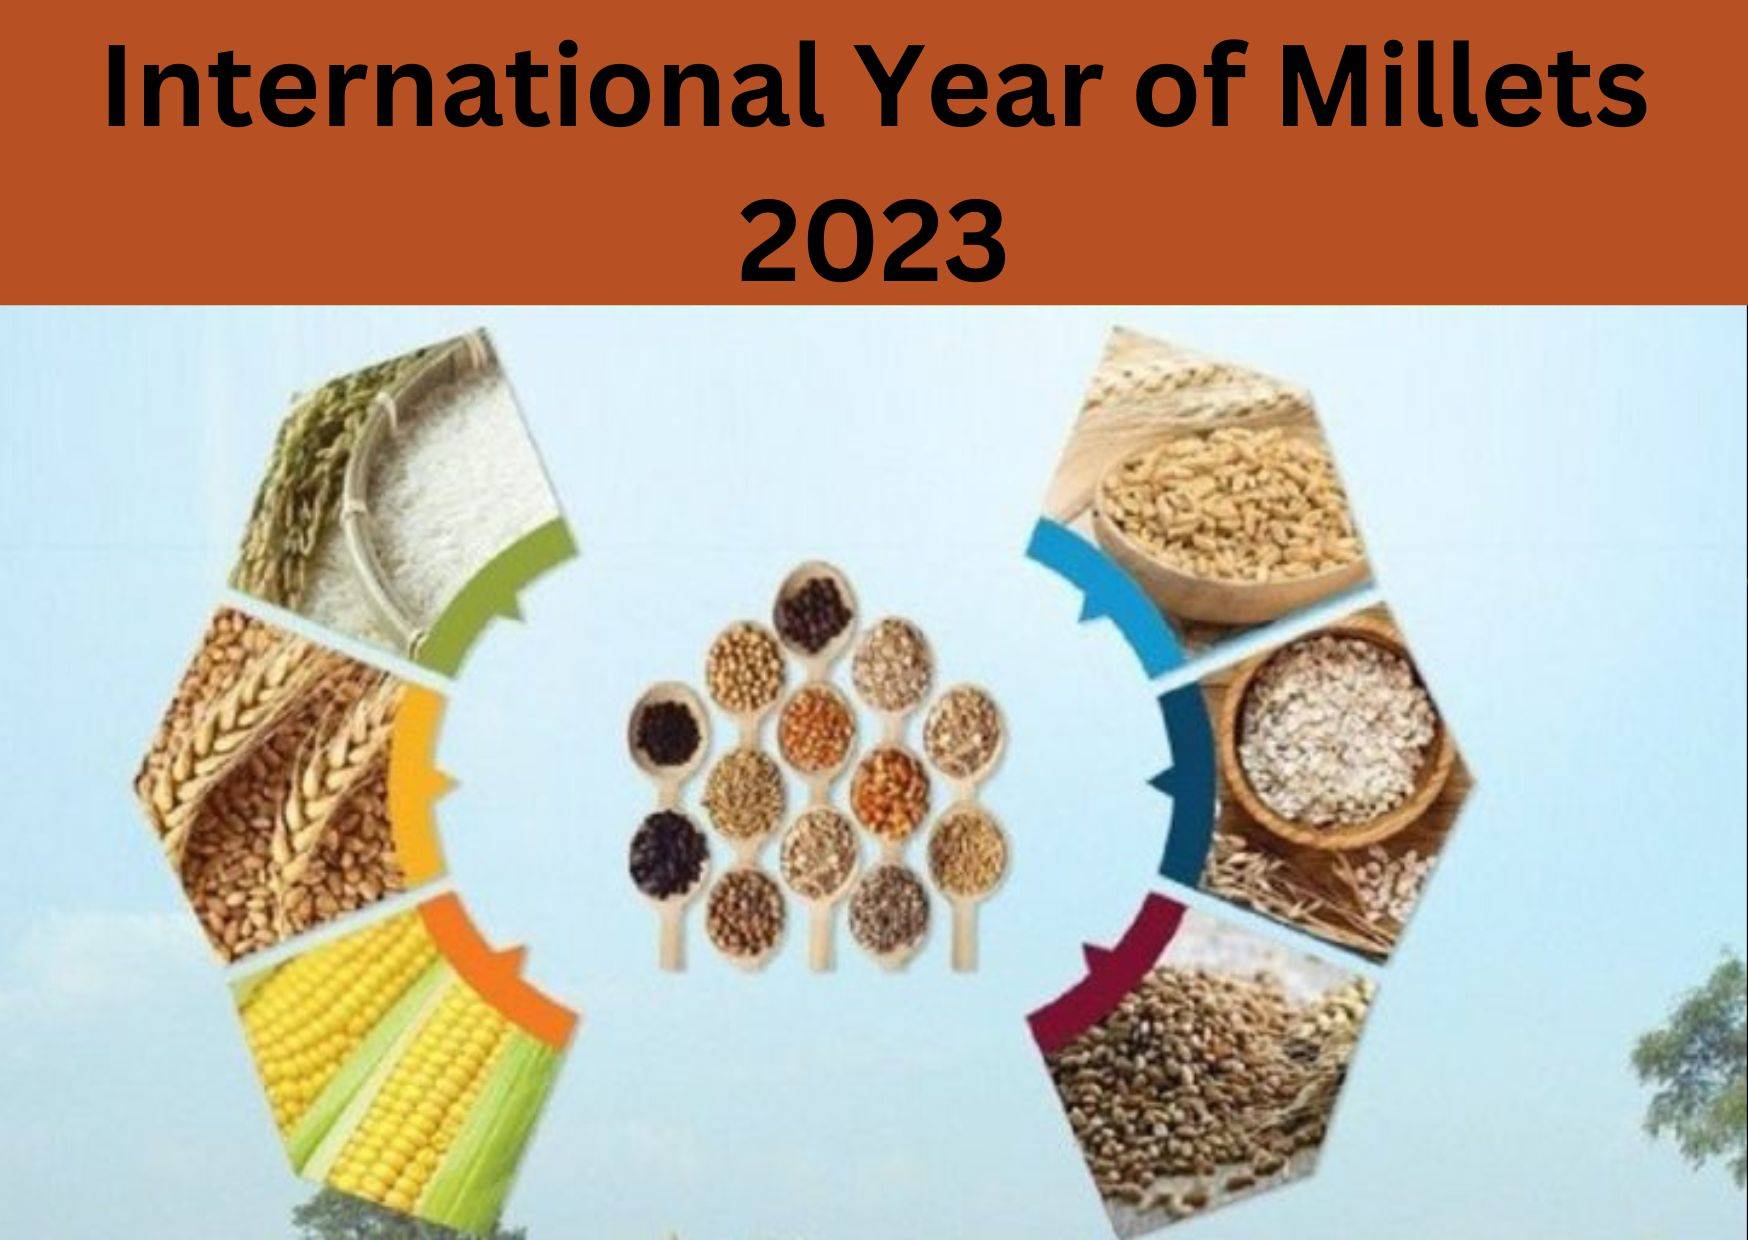 Agriculture ministry, NAFED sign MoU to boost international year of millets 2023